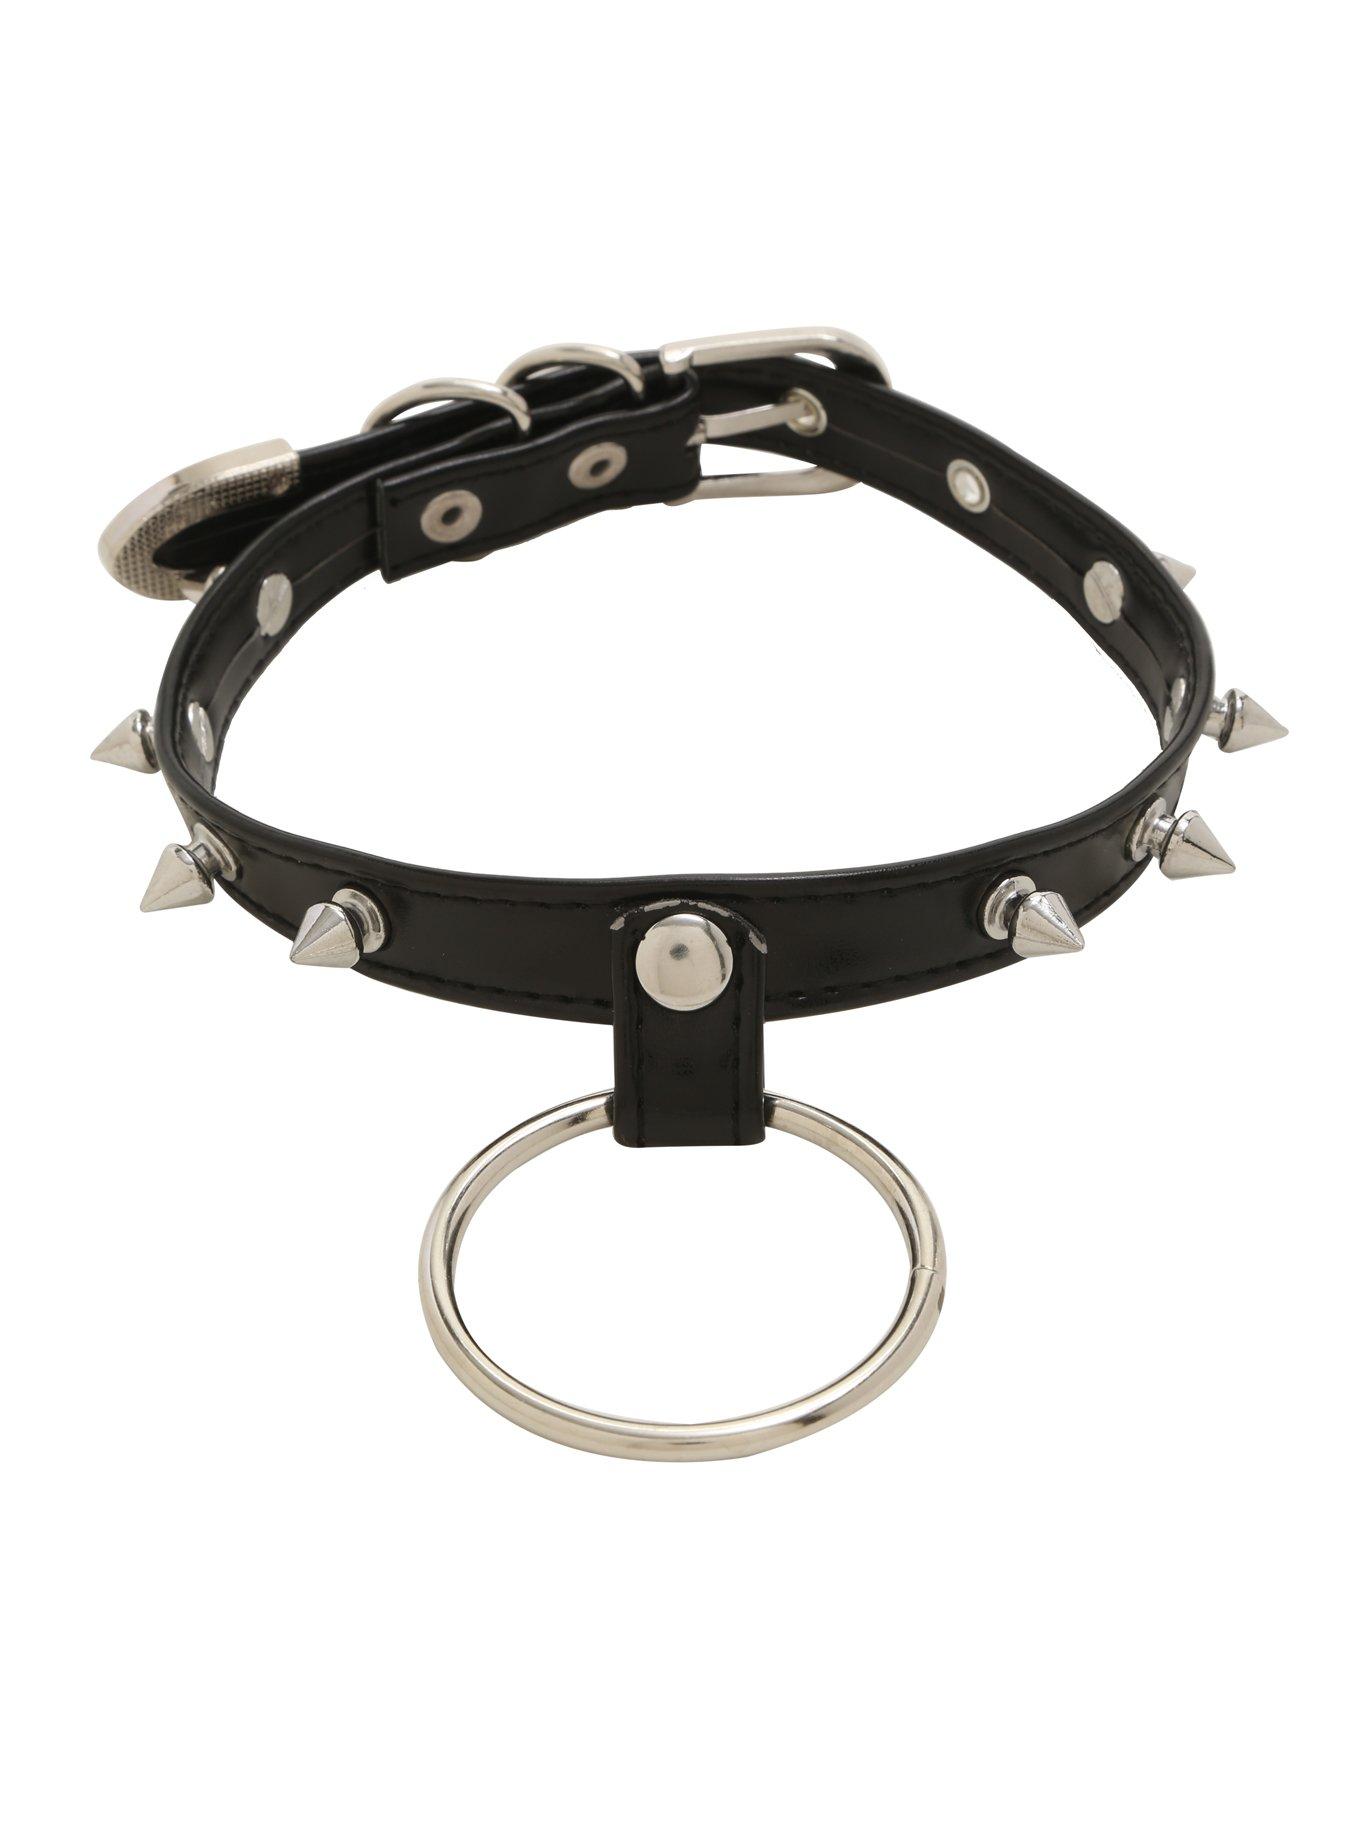 Blackheart Faux Leather Spiked Large O-Ring Choker, , hi-res